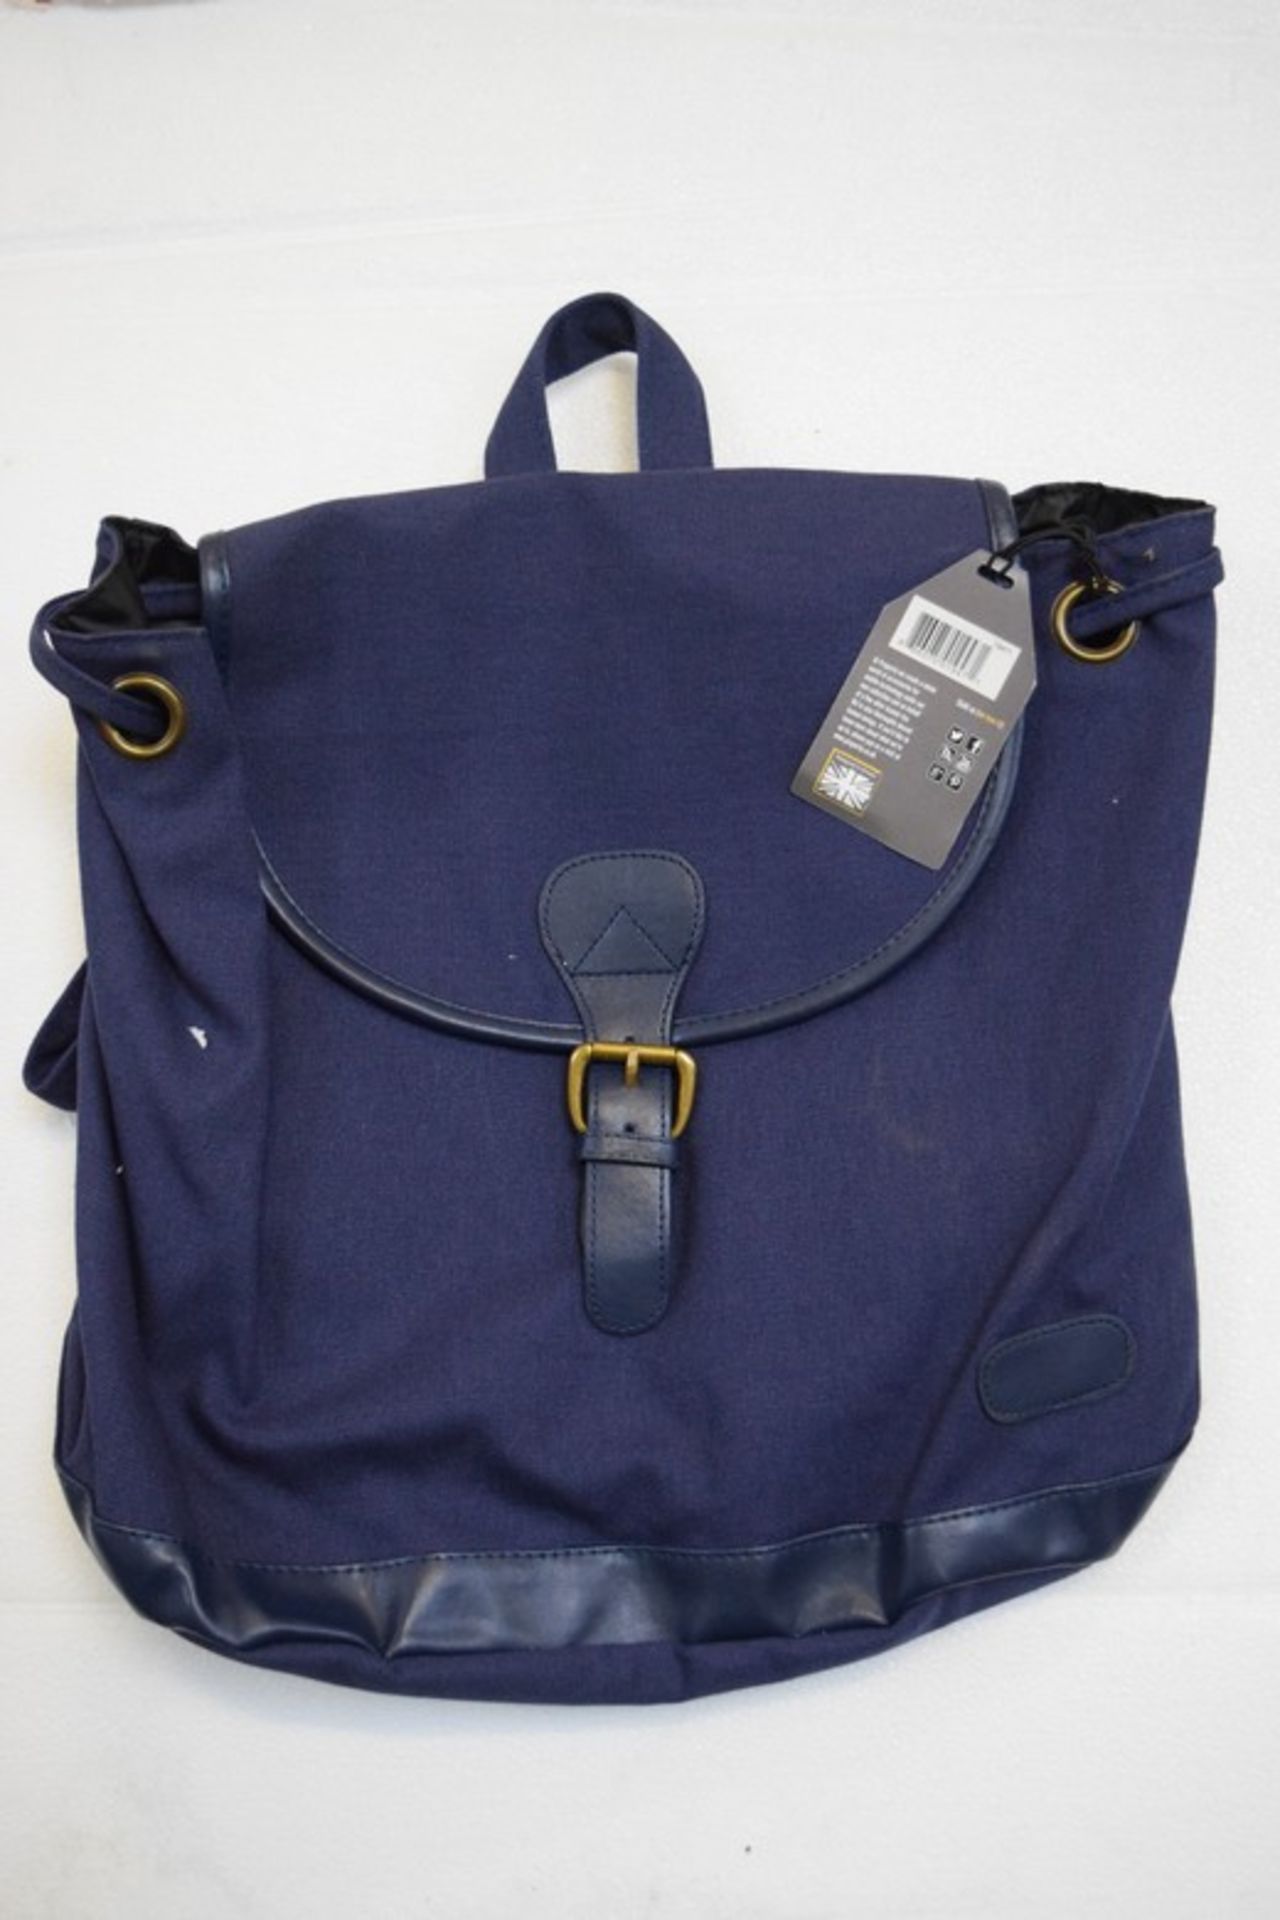 5 X PRO PORTER LADIES SHOULDER BAGS IN BLUE COMBINED RRP £100 (23.11.2016) (AC)